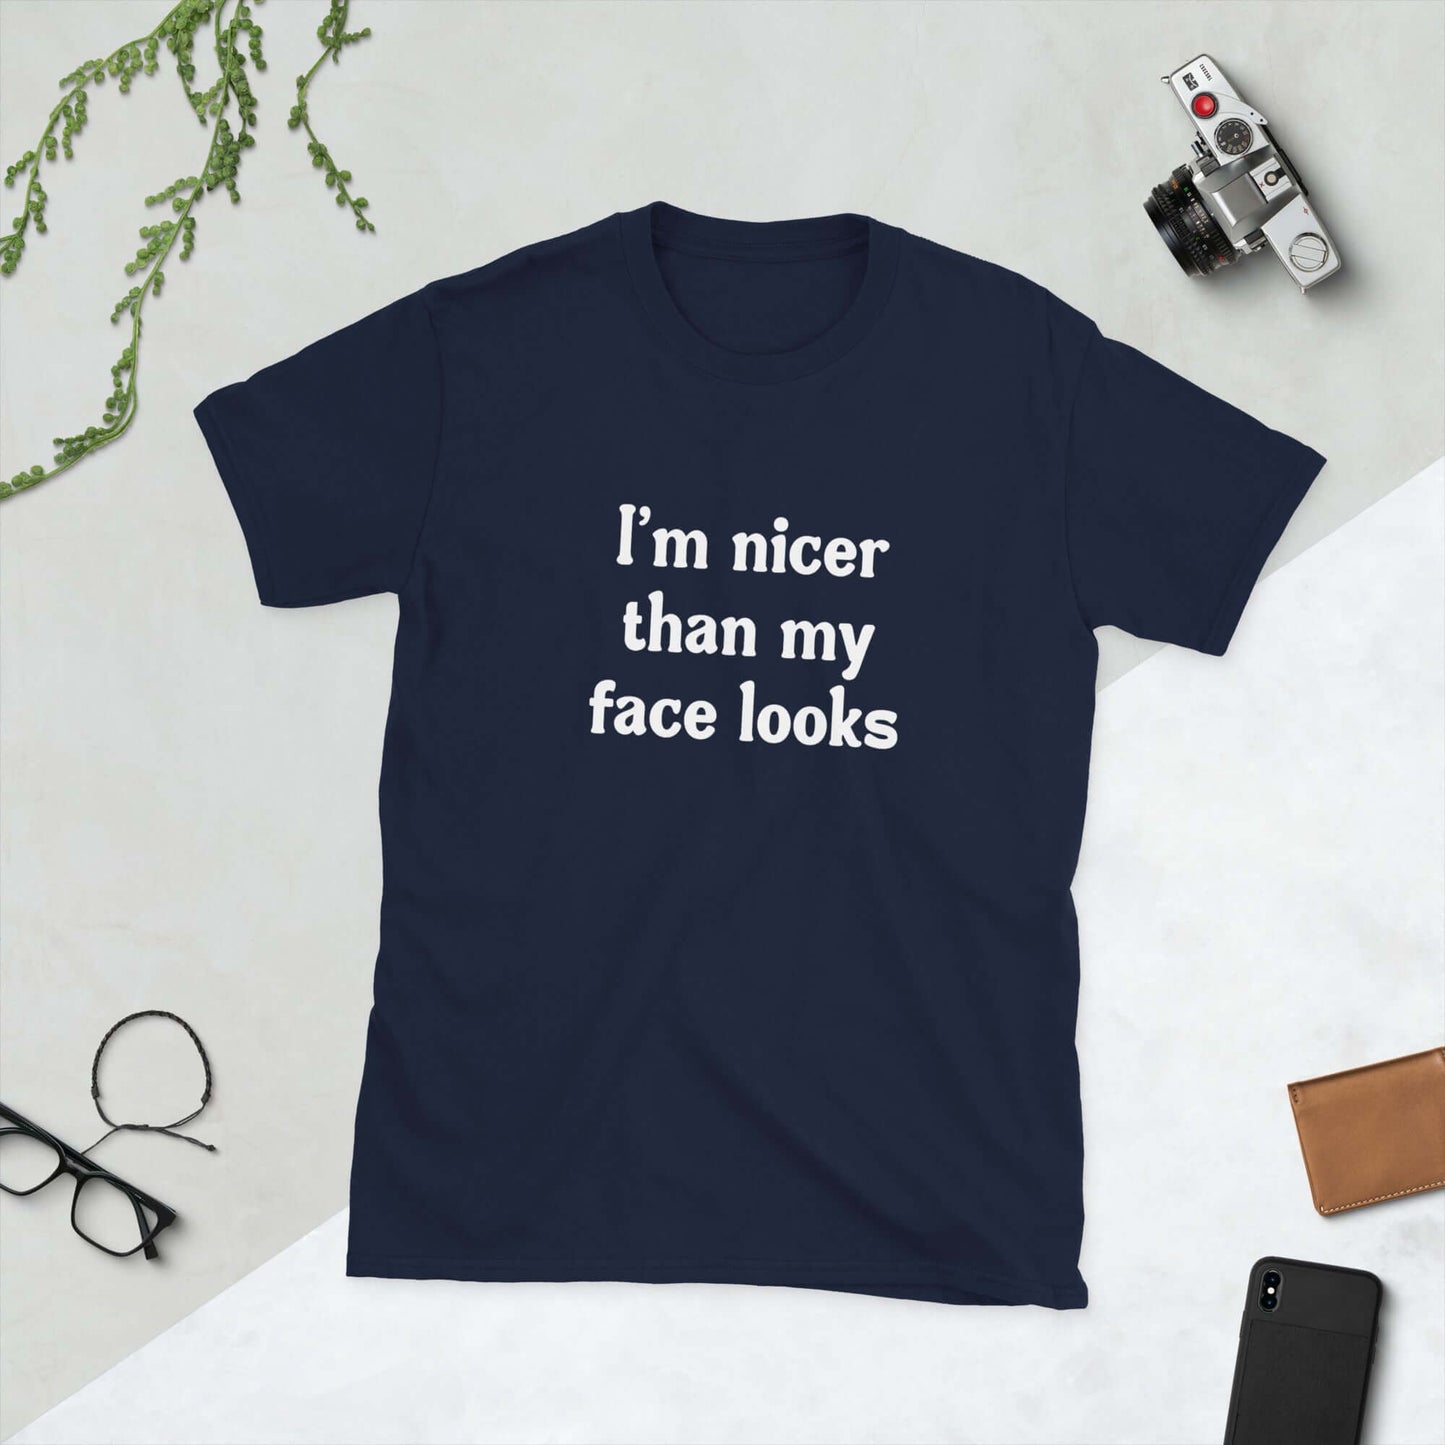 Navy blue t-shirt that says I'm nicer than my face looks printed on the front.